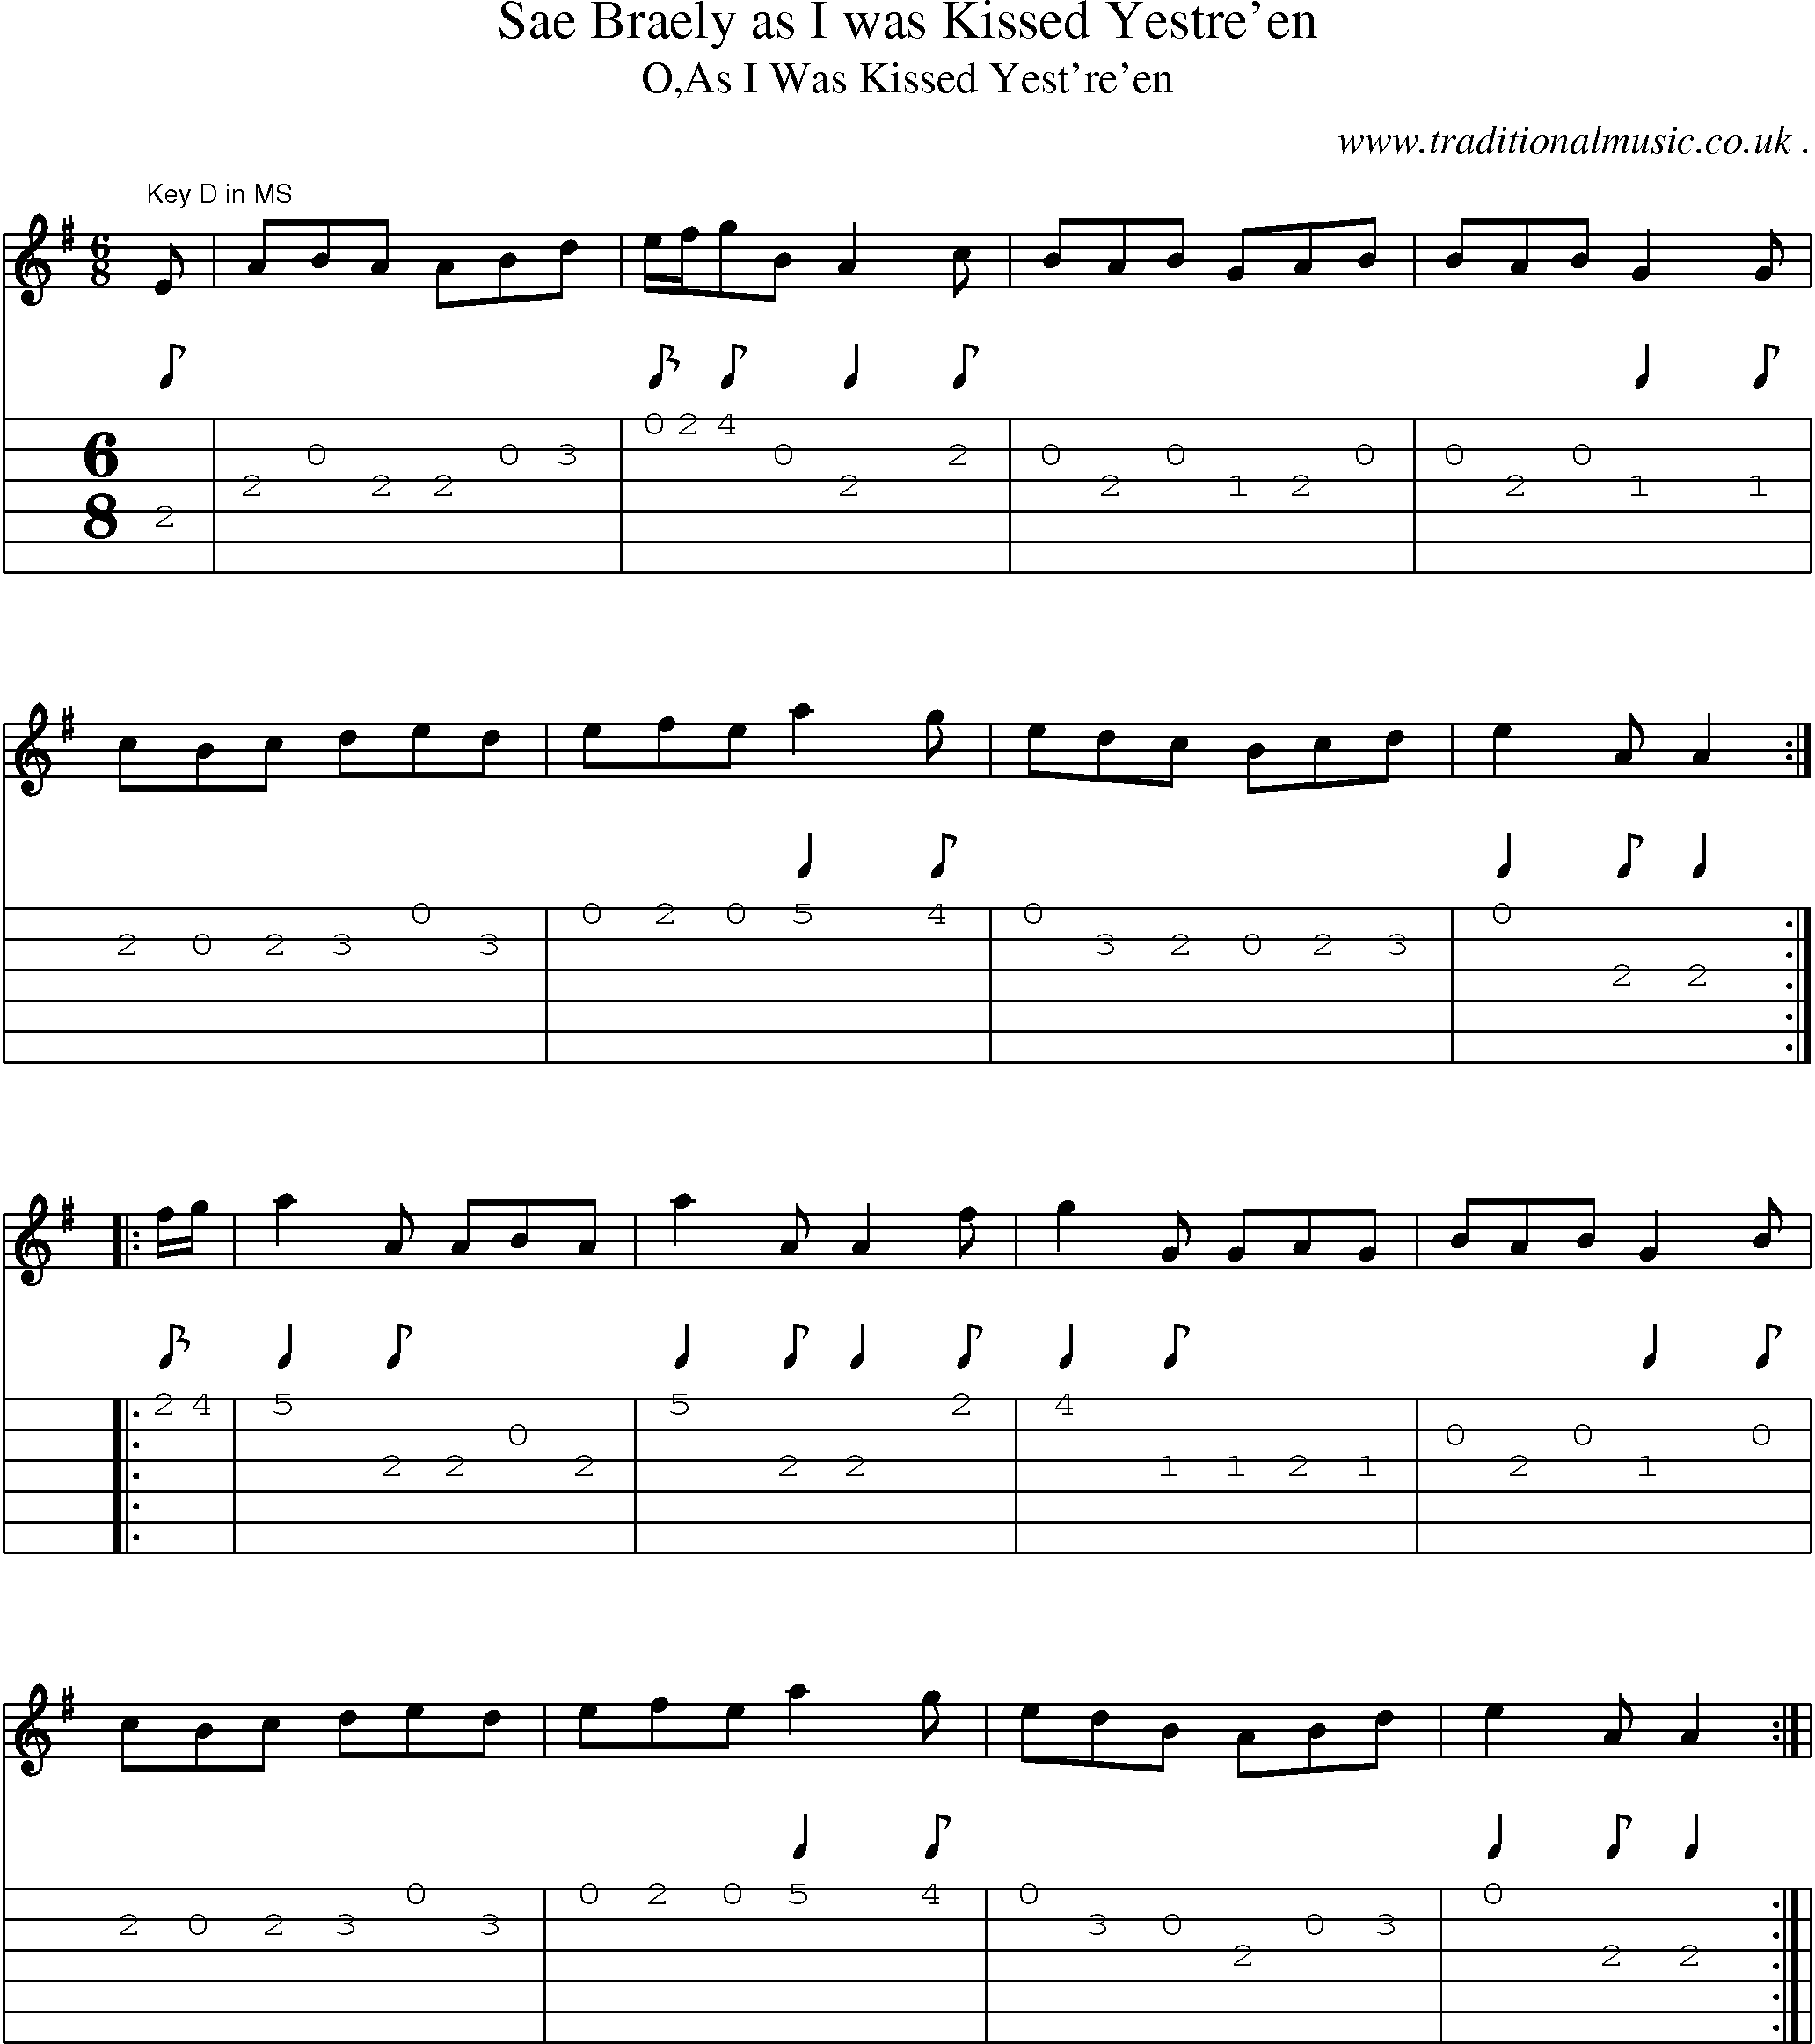 Sheet-Music and Guitar Tabs for Sae Braely As I Was Kissed Yestreen